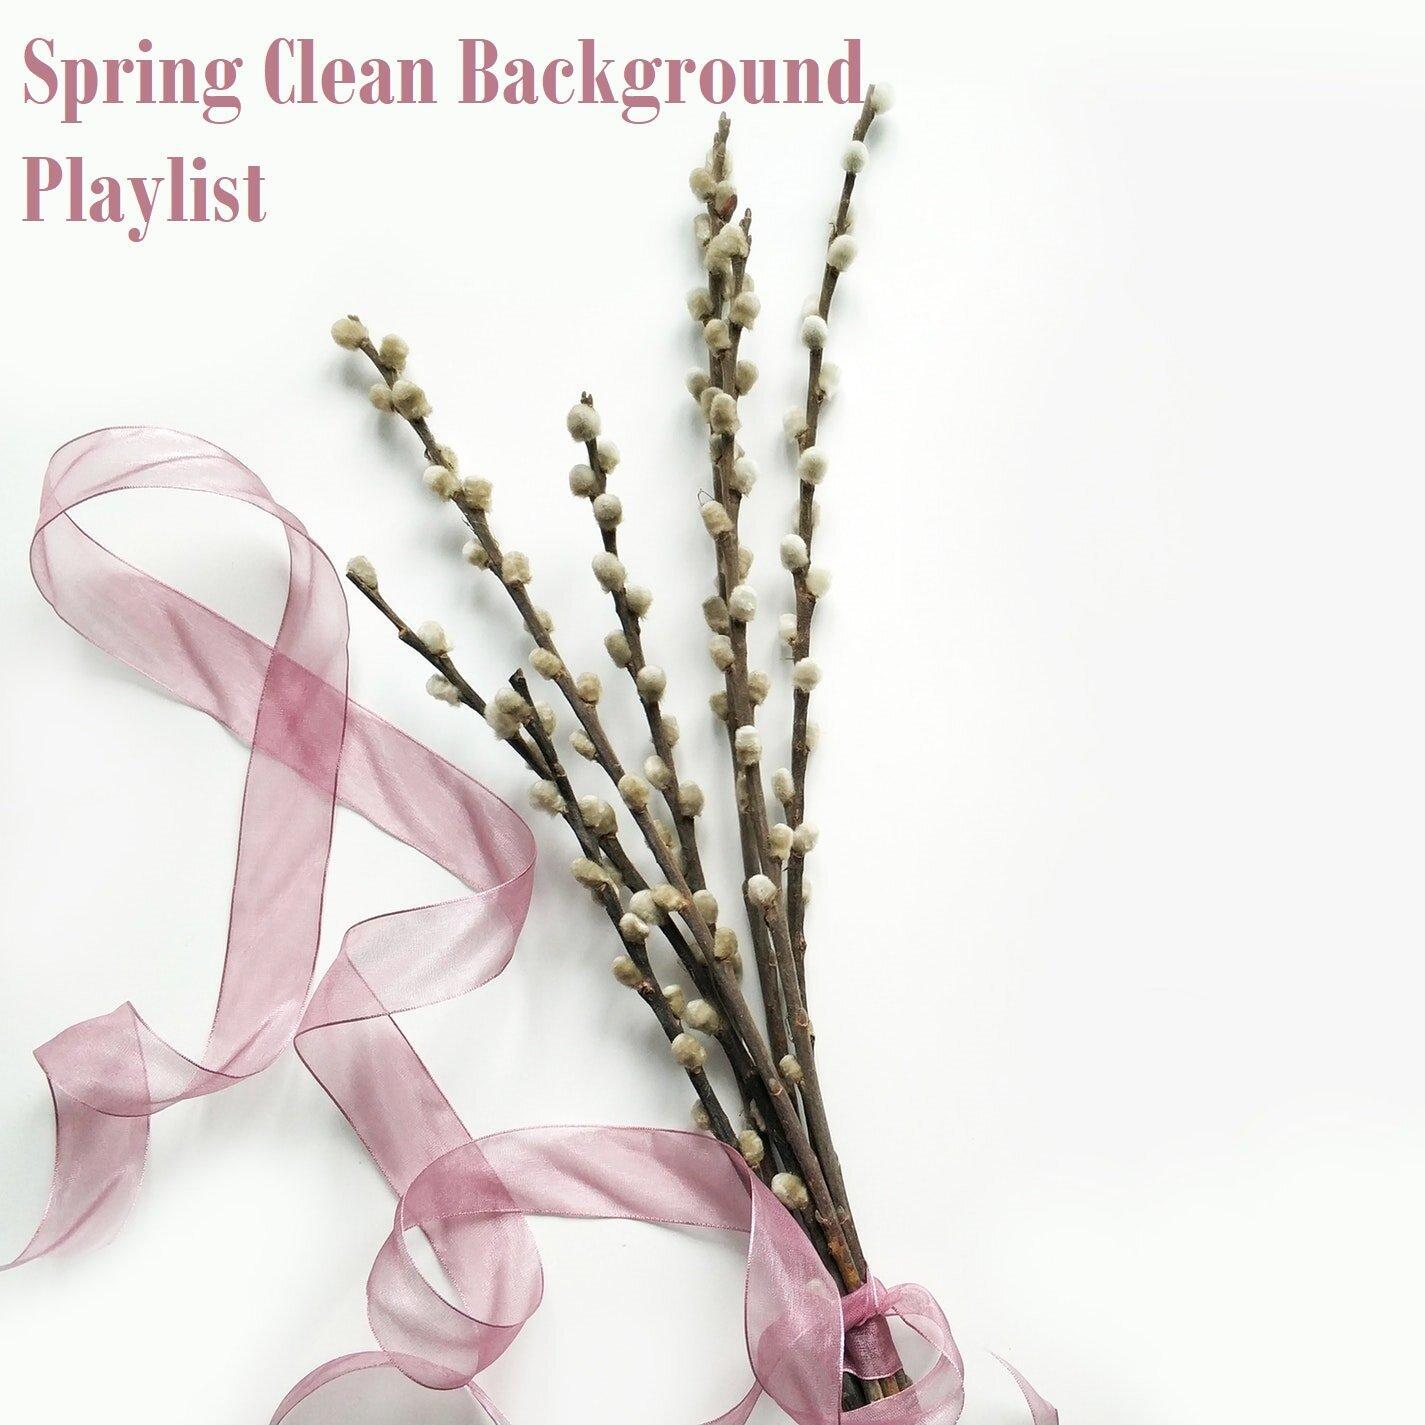 Jazz Piano & Bass for Spring Cleaning